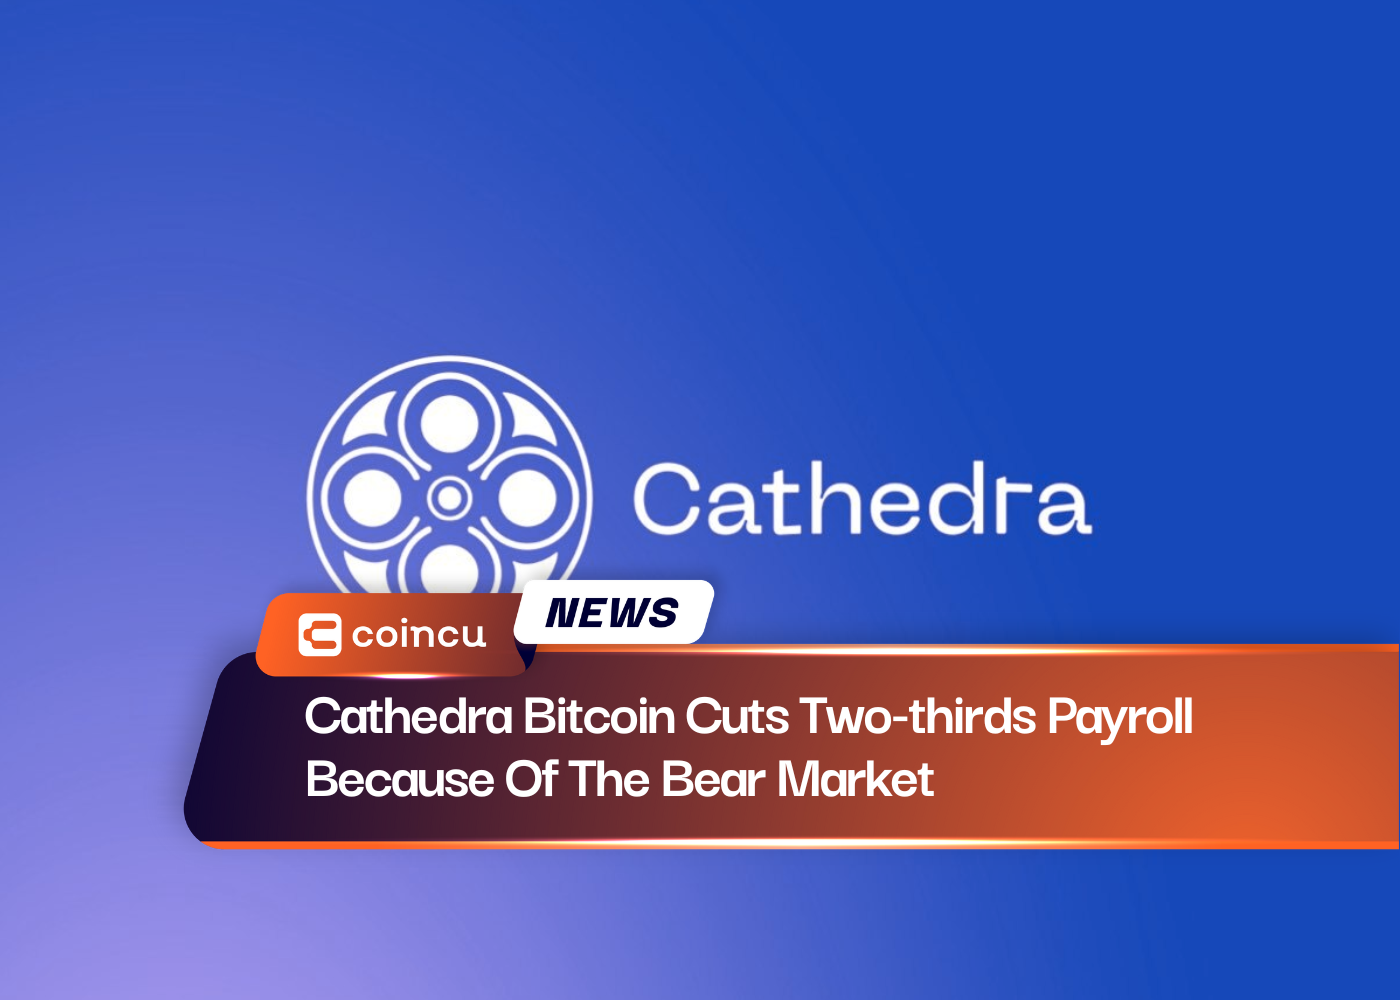 Cathedra Bitcoin Cuts Two-thirds Payroll Because Of The Bear Market